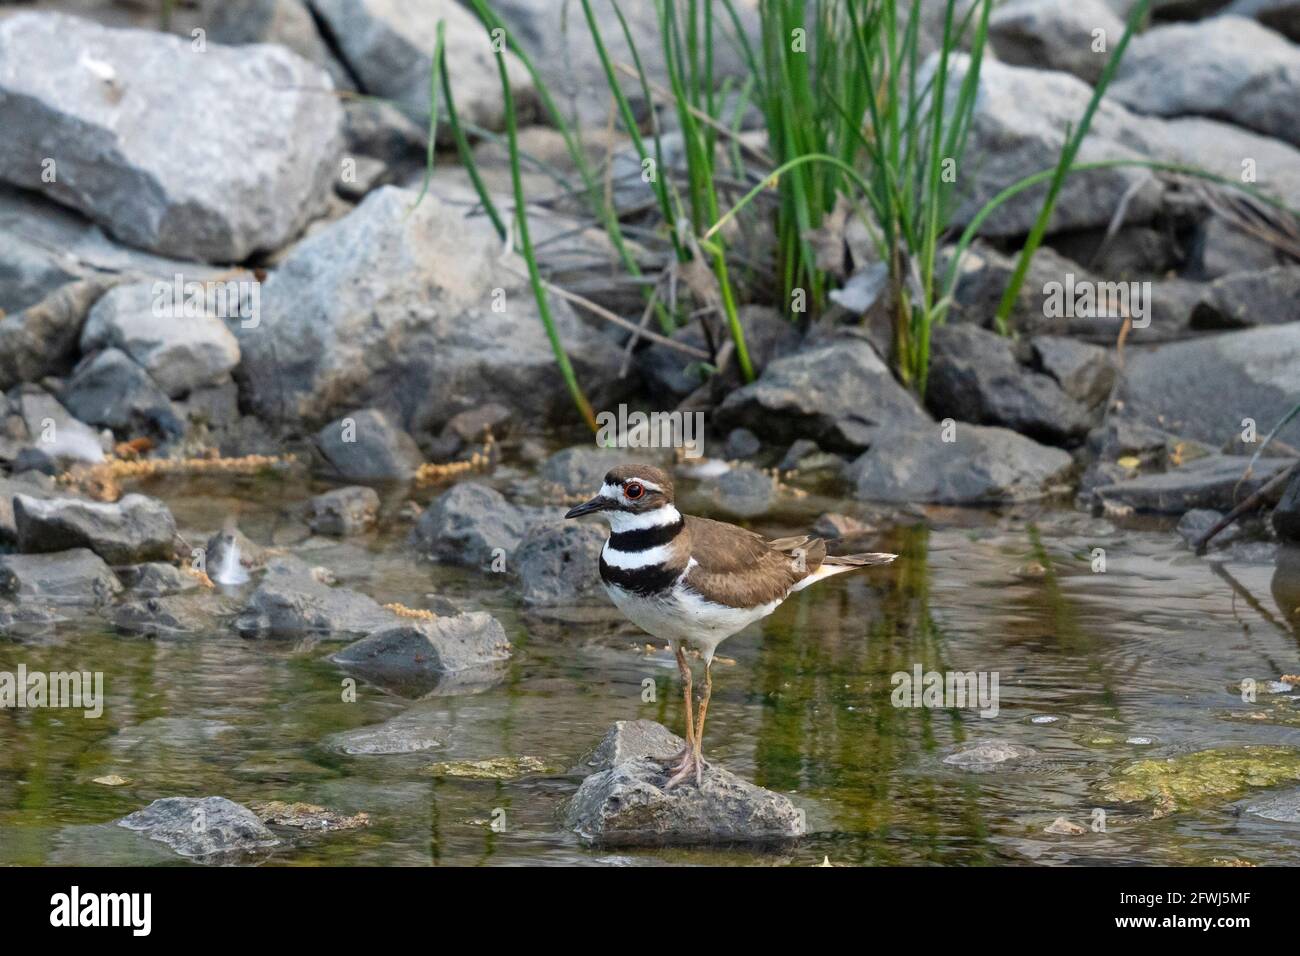 Killdeer, (Charadrius vociferus), Bird perched on a rock in shallow waters of a brook Stock Photo